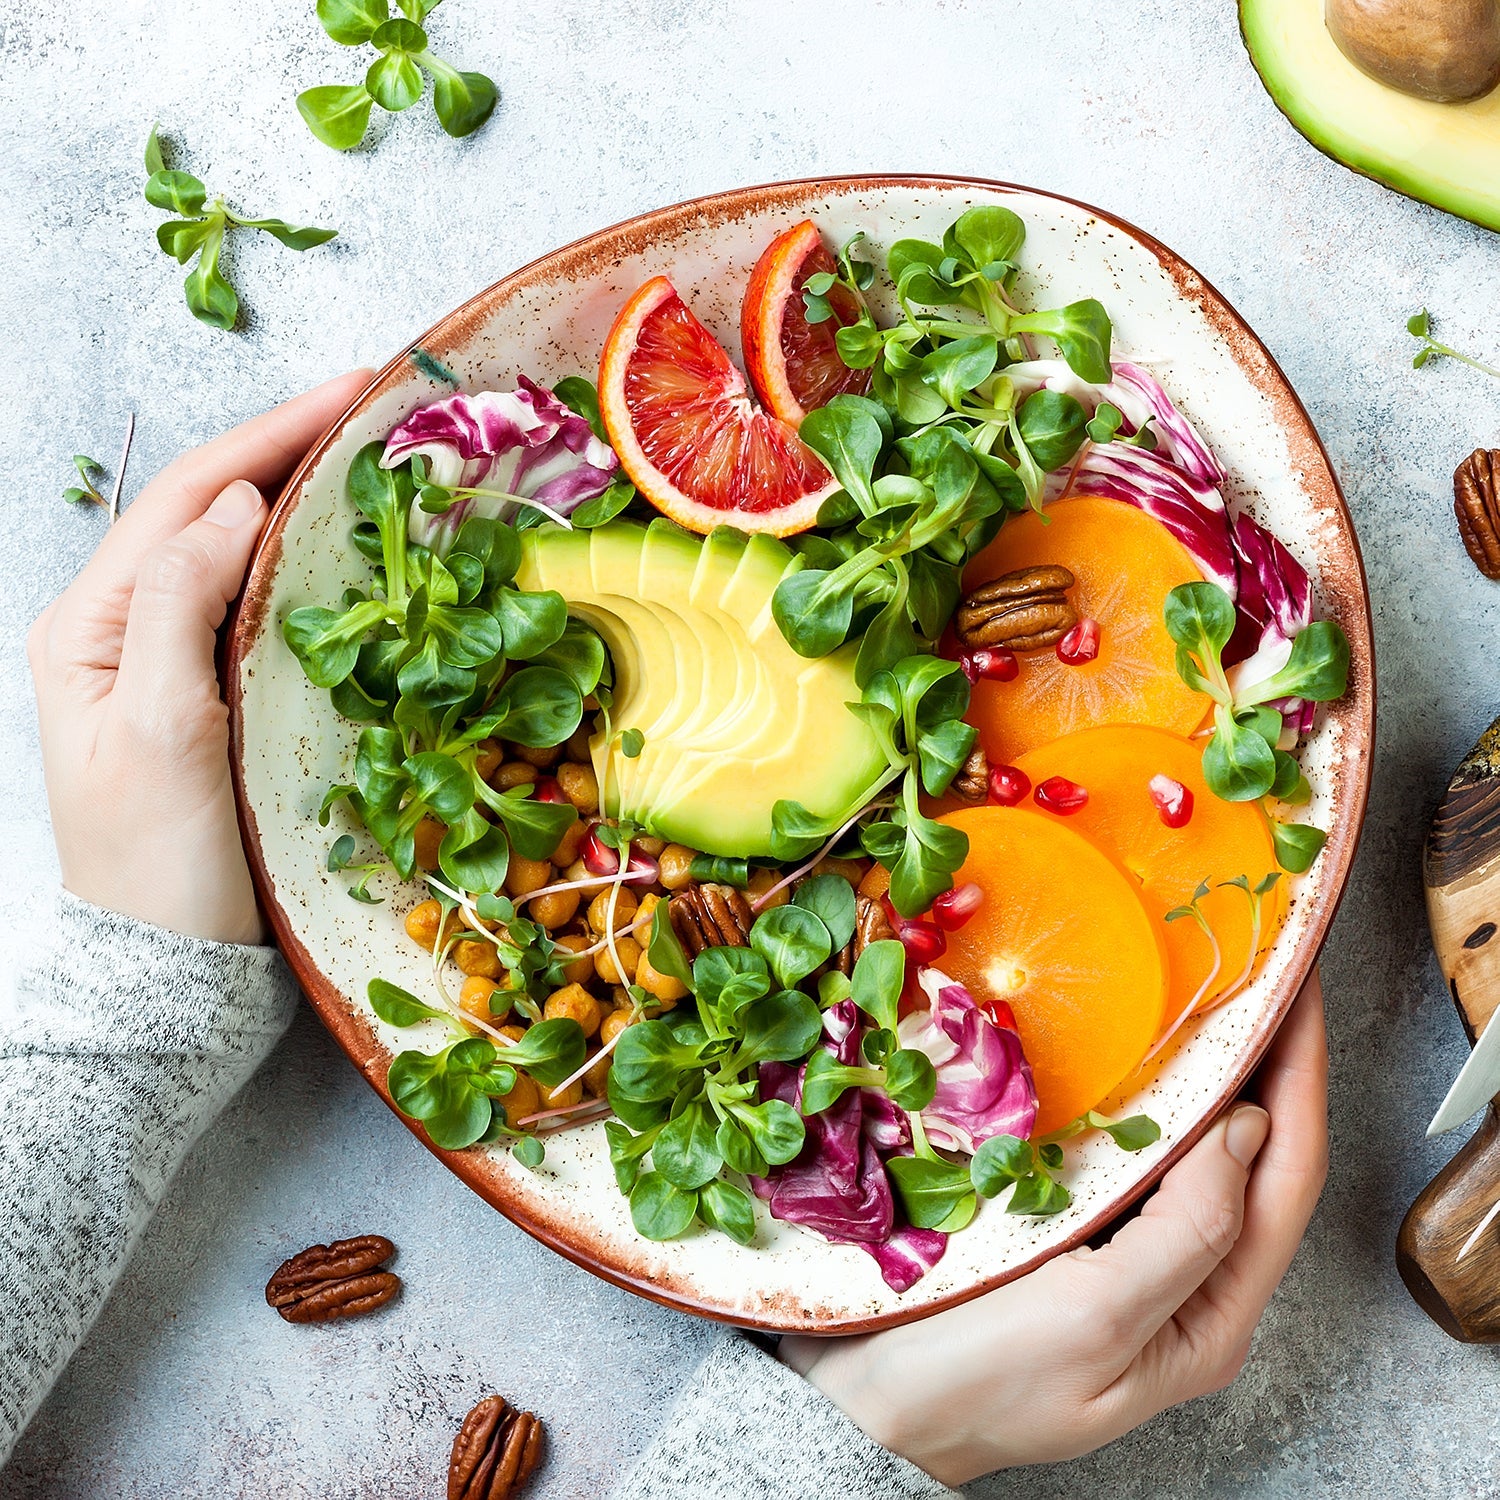 Top Plant-Based Food Trends 2020